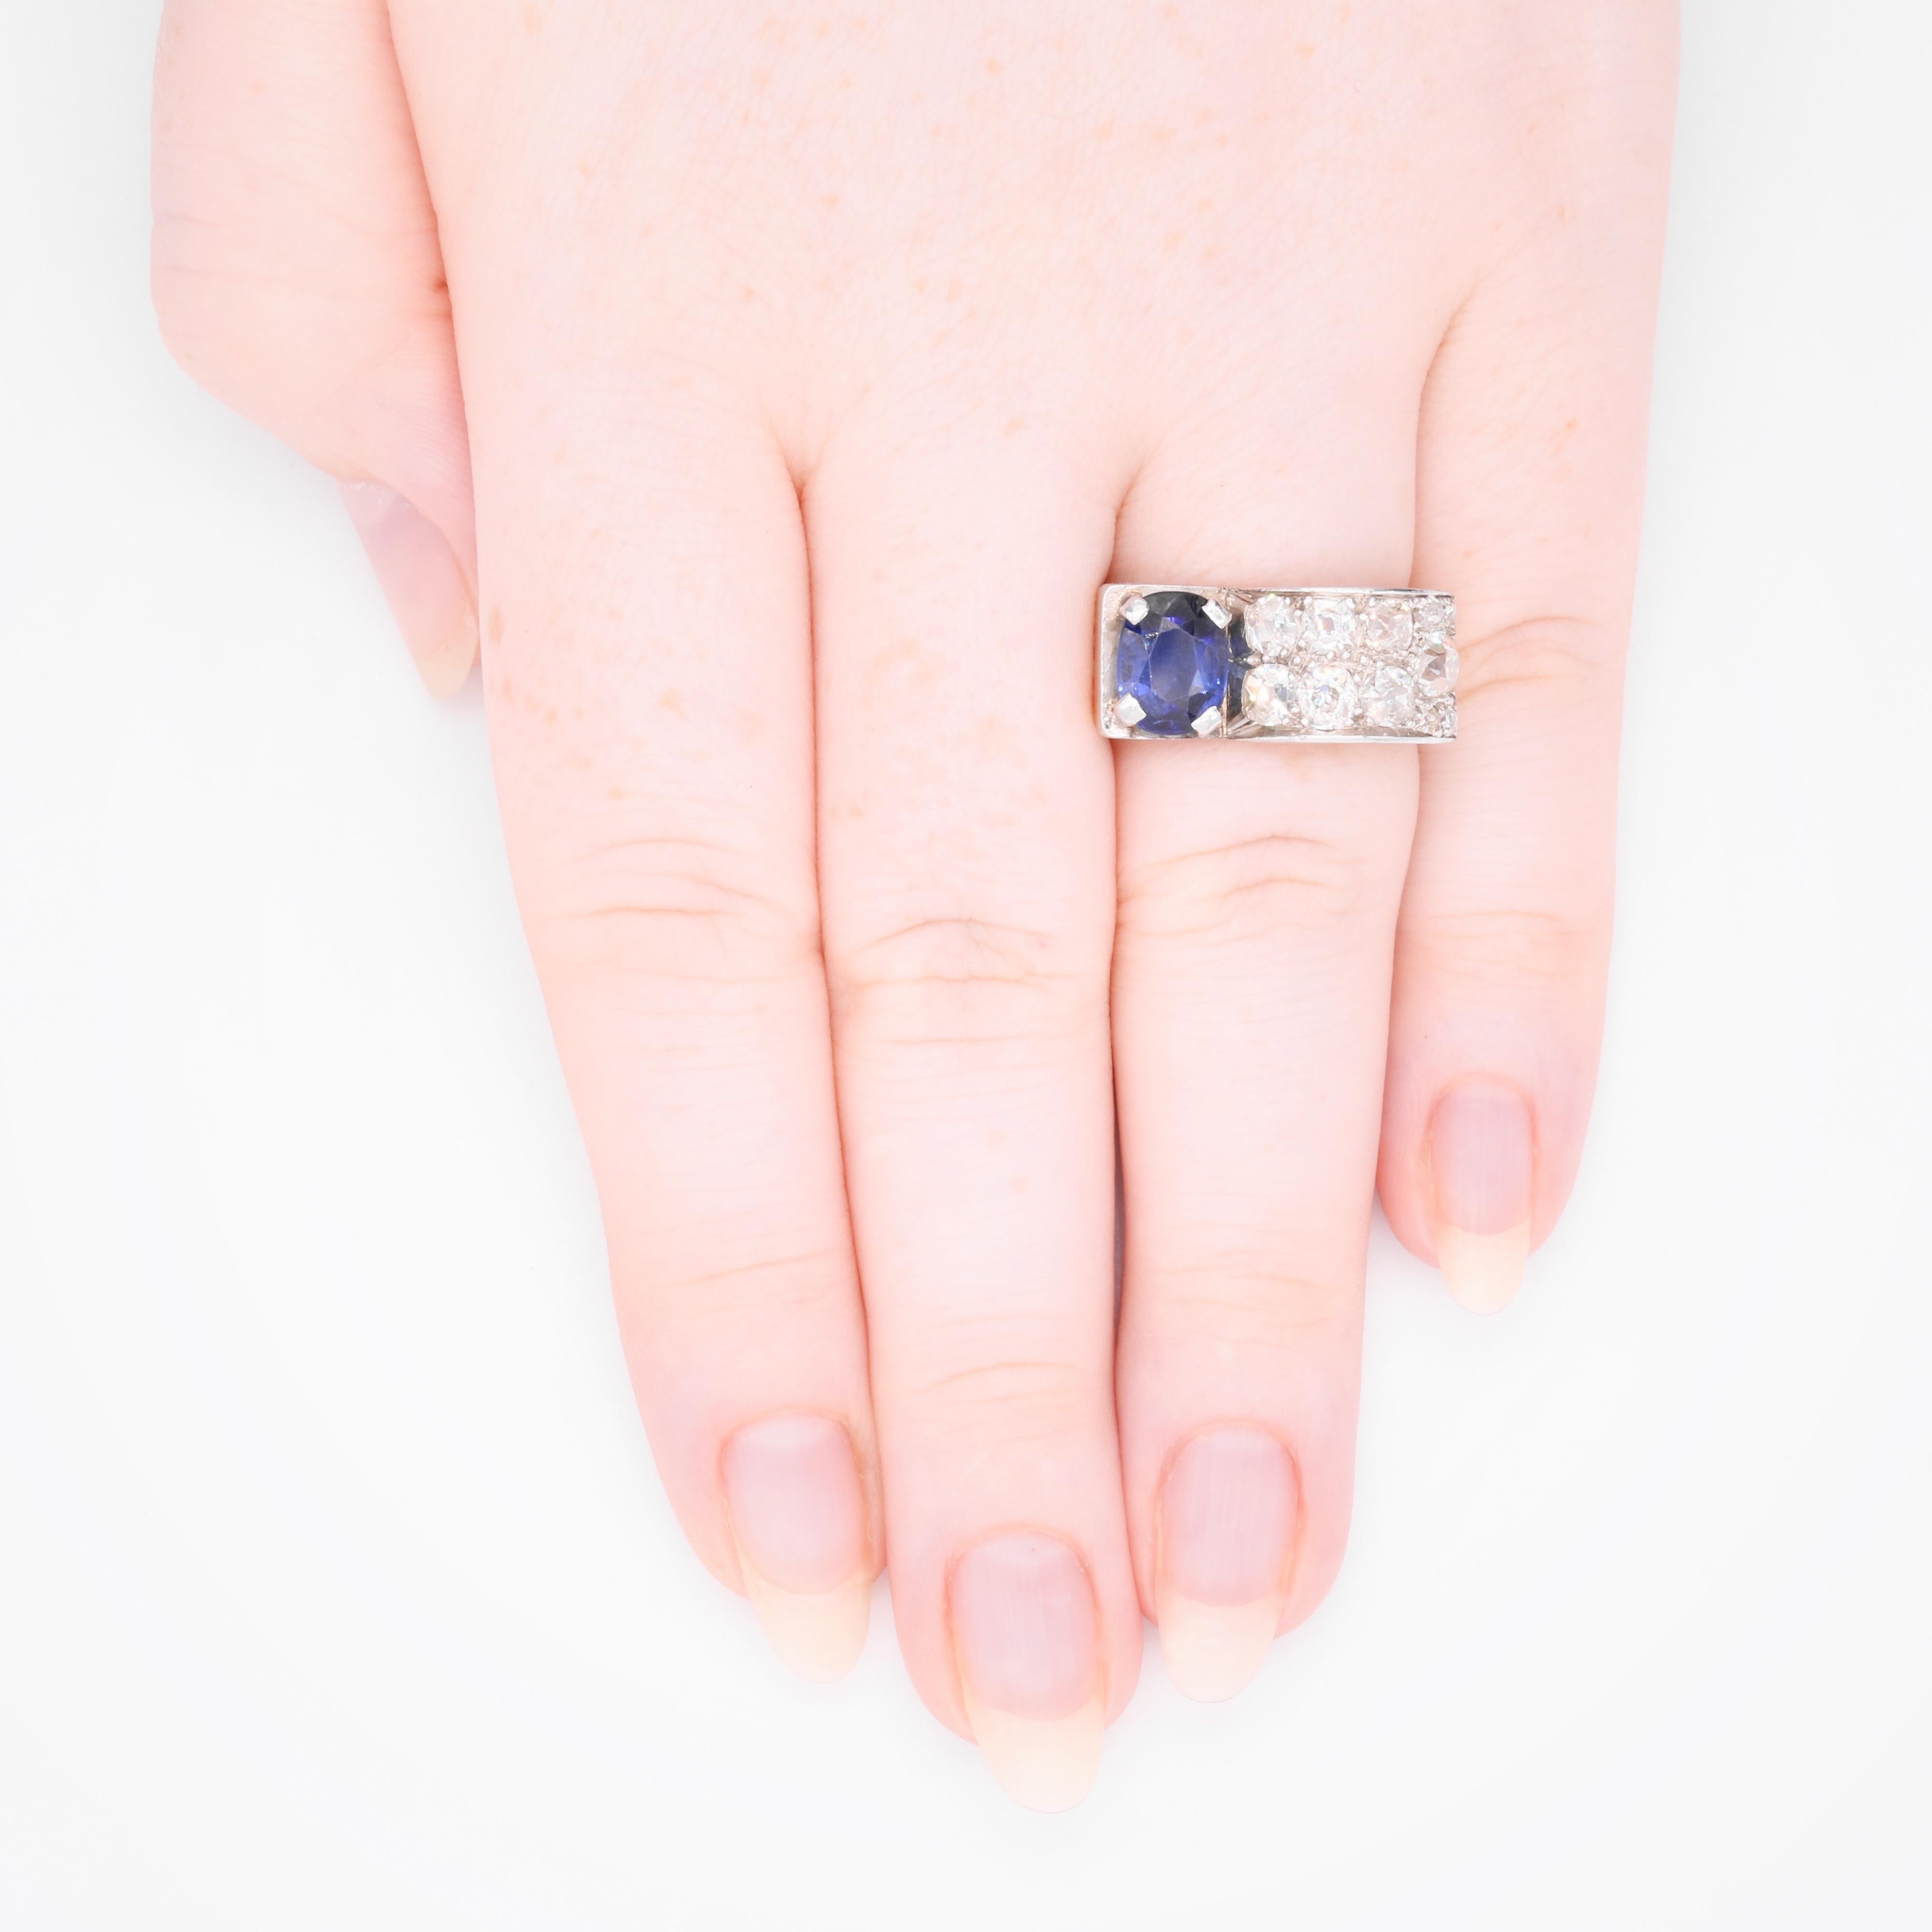 An Art Deco sapphire, diamond, platinum, and yellow gold ring, comprising one oval cut blue sapphire, and eleven old mine cut and Peruzzi cut diamonds, set in platinum, to a band of 18 karat yellow gold.

This ring is in the statement ‘odeonesque’